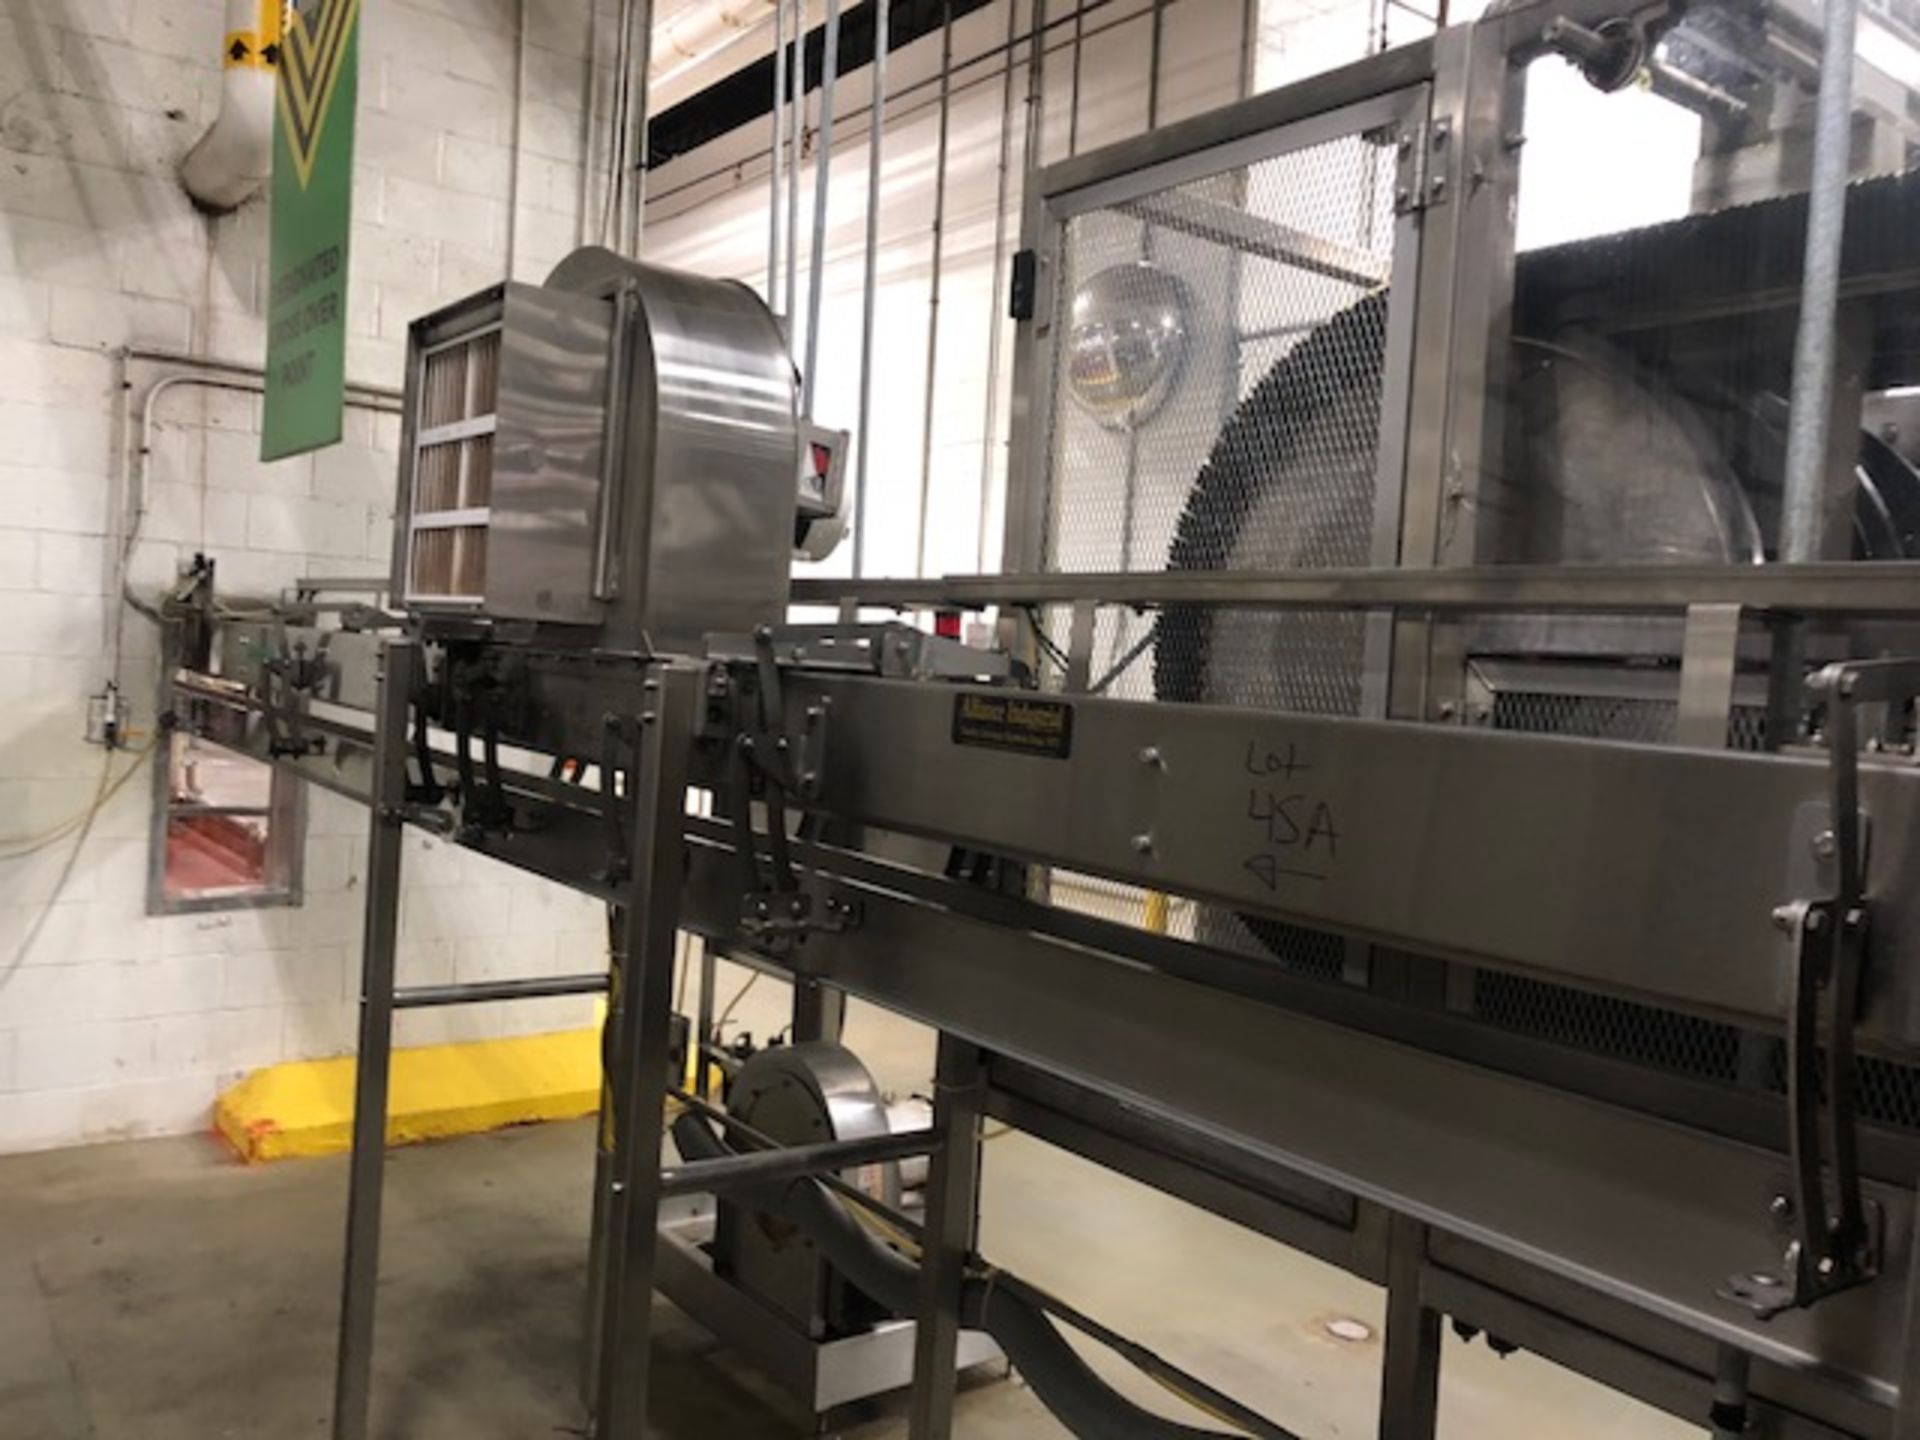 Alliance Industrial Stainless Steel Air Conveyor System | Rigging/Loading Fee: $1000 - Image 3 of 7